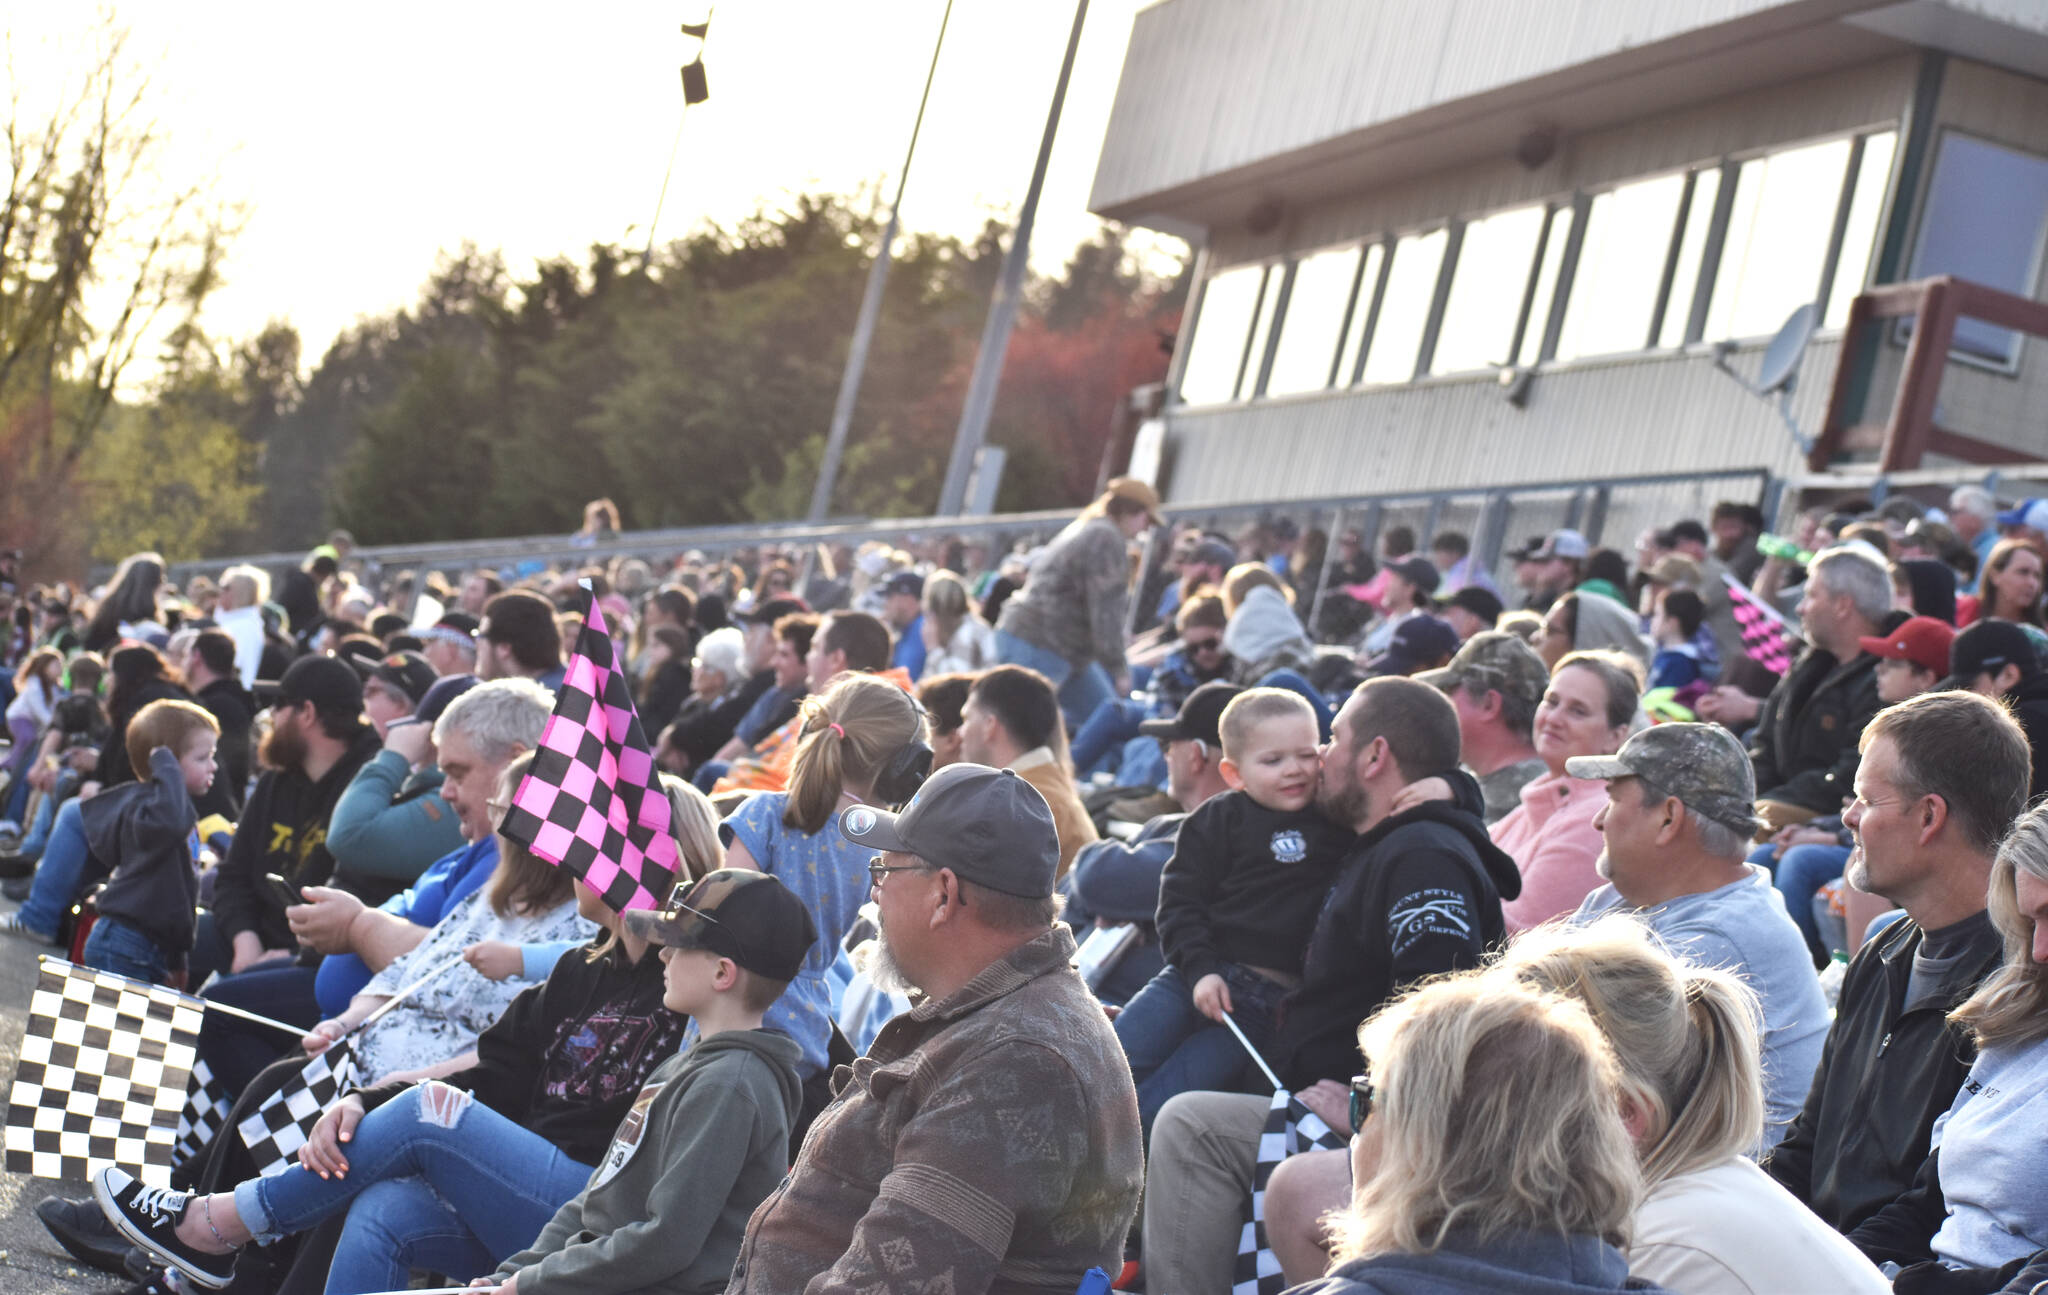 Allen Leister | The Daily World
A large crowd turned out at the Grays Harbor Raceway on Saturday, April 23, 2022, in Elma.